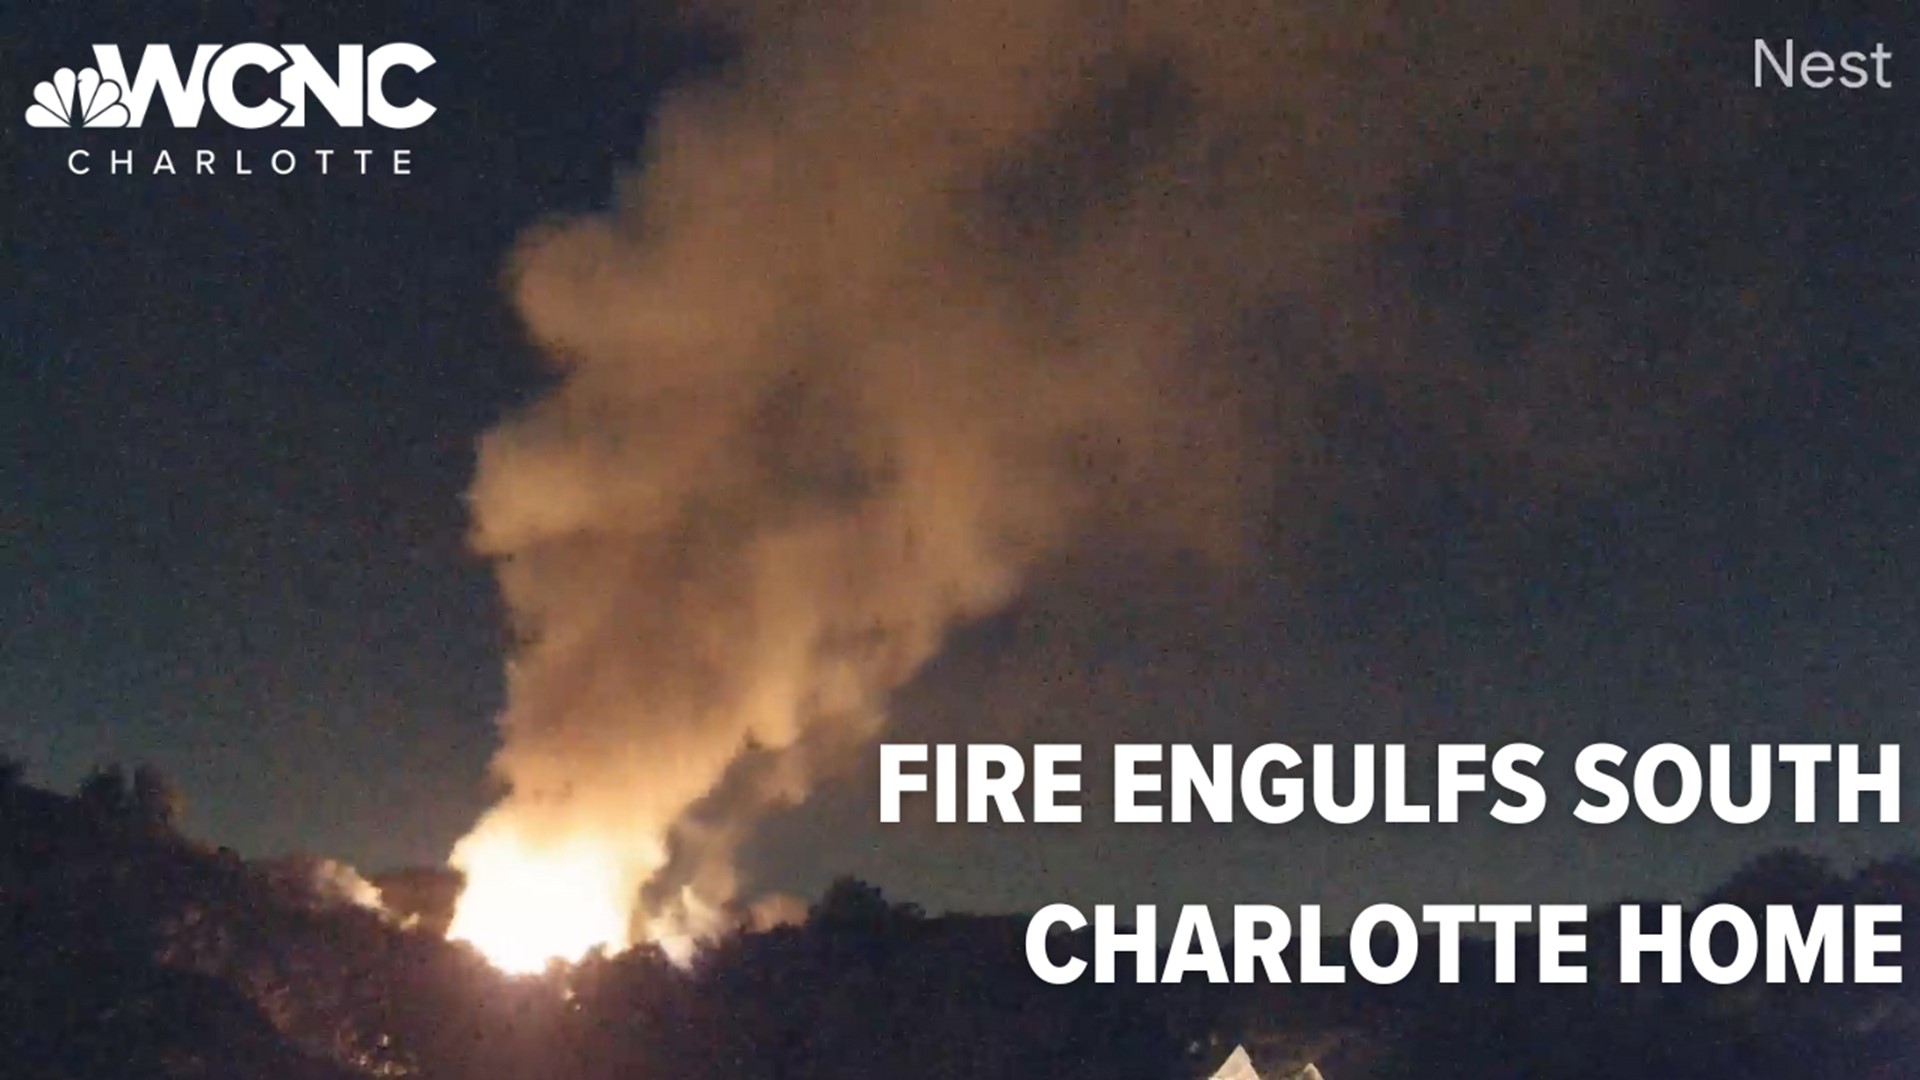 A WCNC Charlotte employee captured video of a fire on their Nest camera overnight.